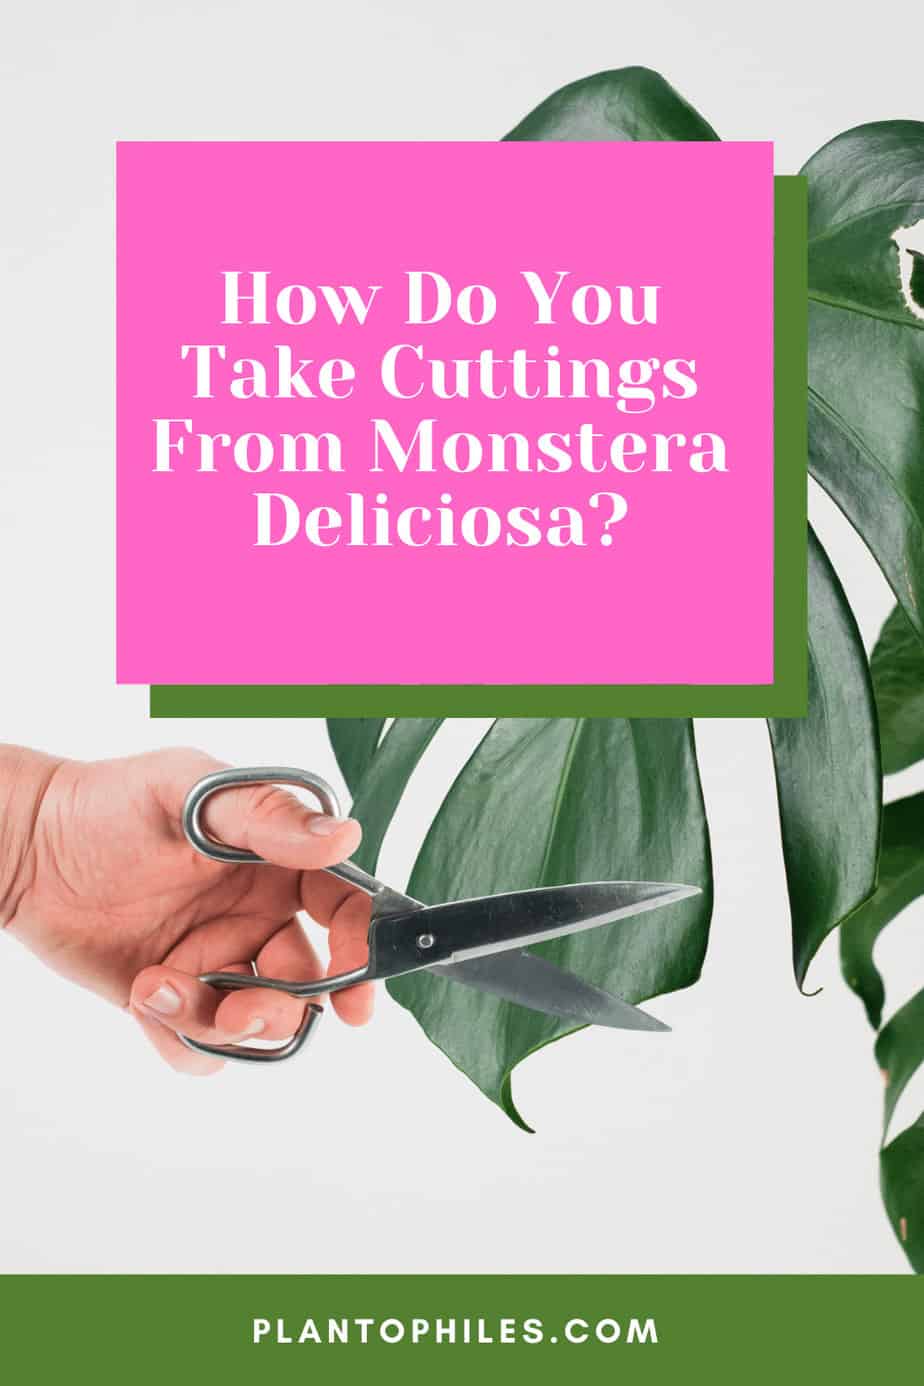 How Do You Take Cuttings From Monstera deliciosa?